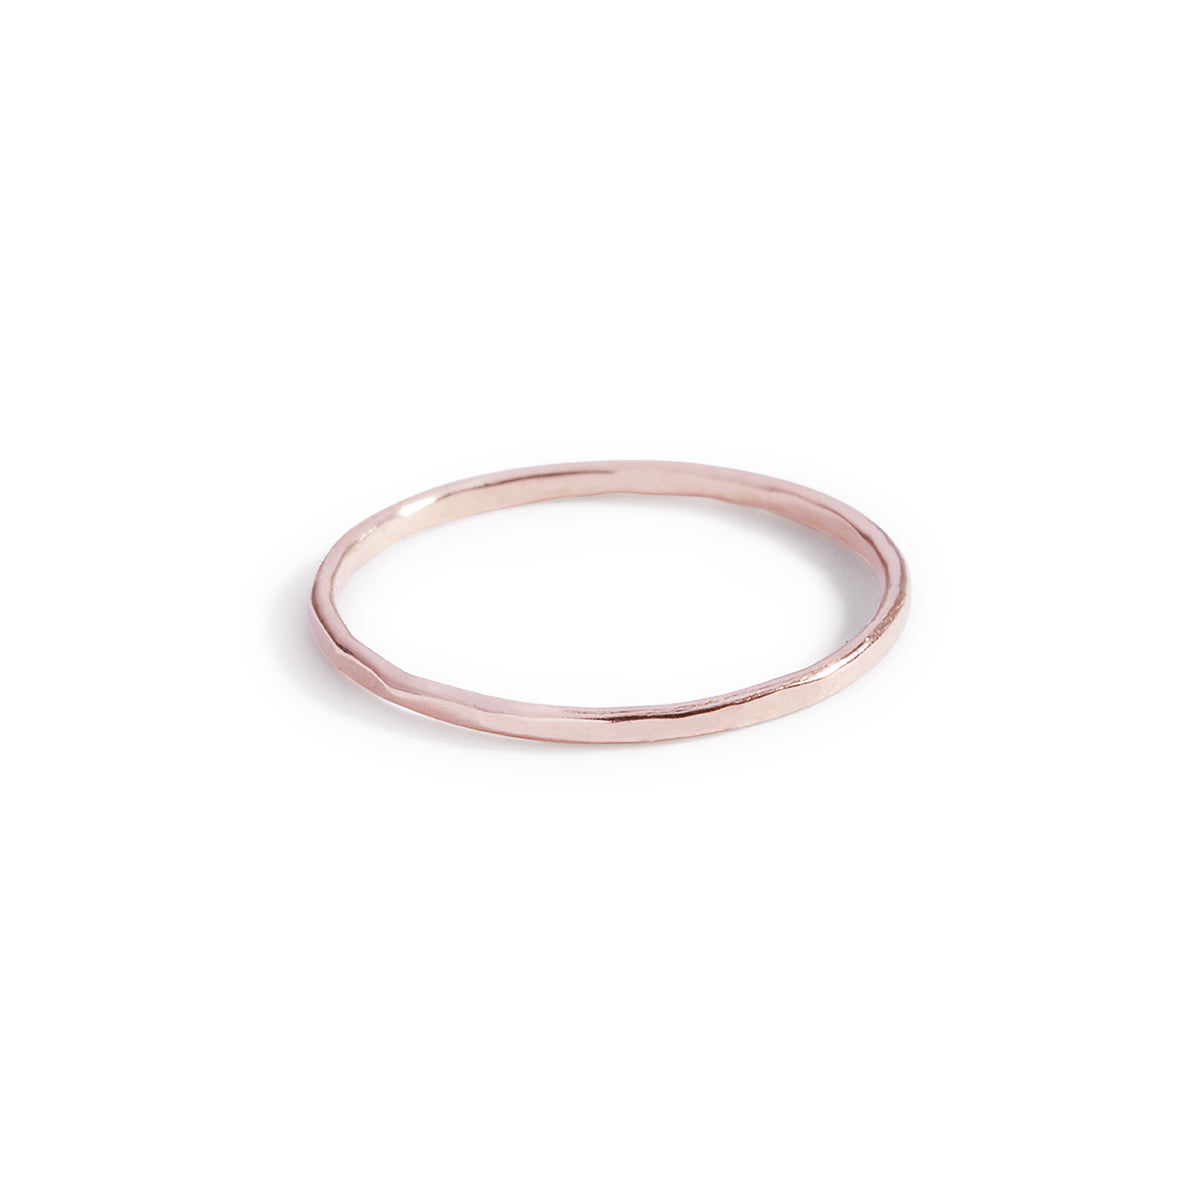 9ct rose gold hammered dainty stack ring